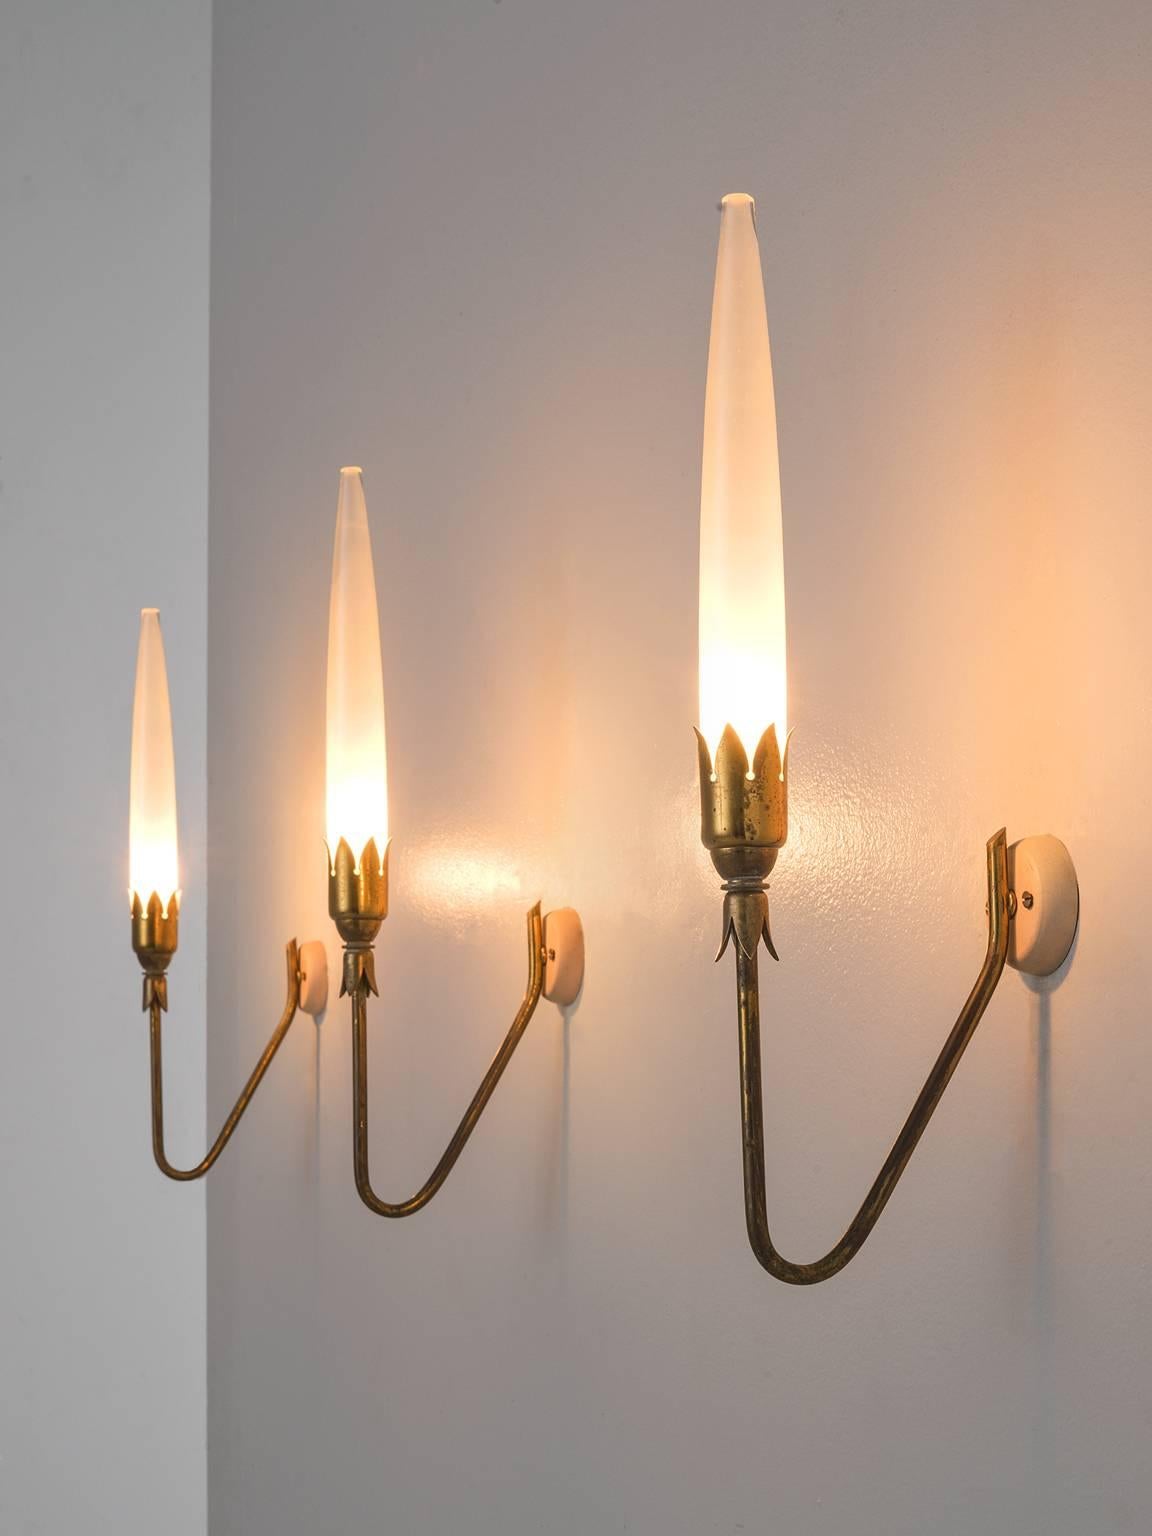 Set of six wall lights in brass and glass, Italy, 1950s.

Set of six slender wall lights are executed in brass and glass are attributed to Angelo Lelli. These sconces hold a thin organic brass frame with an admirable patina. The crown holds the